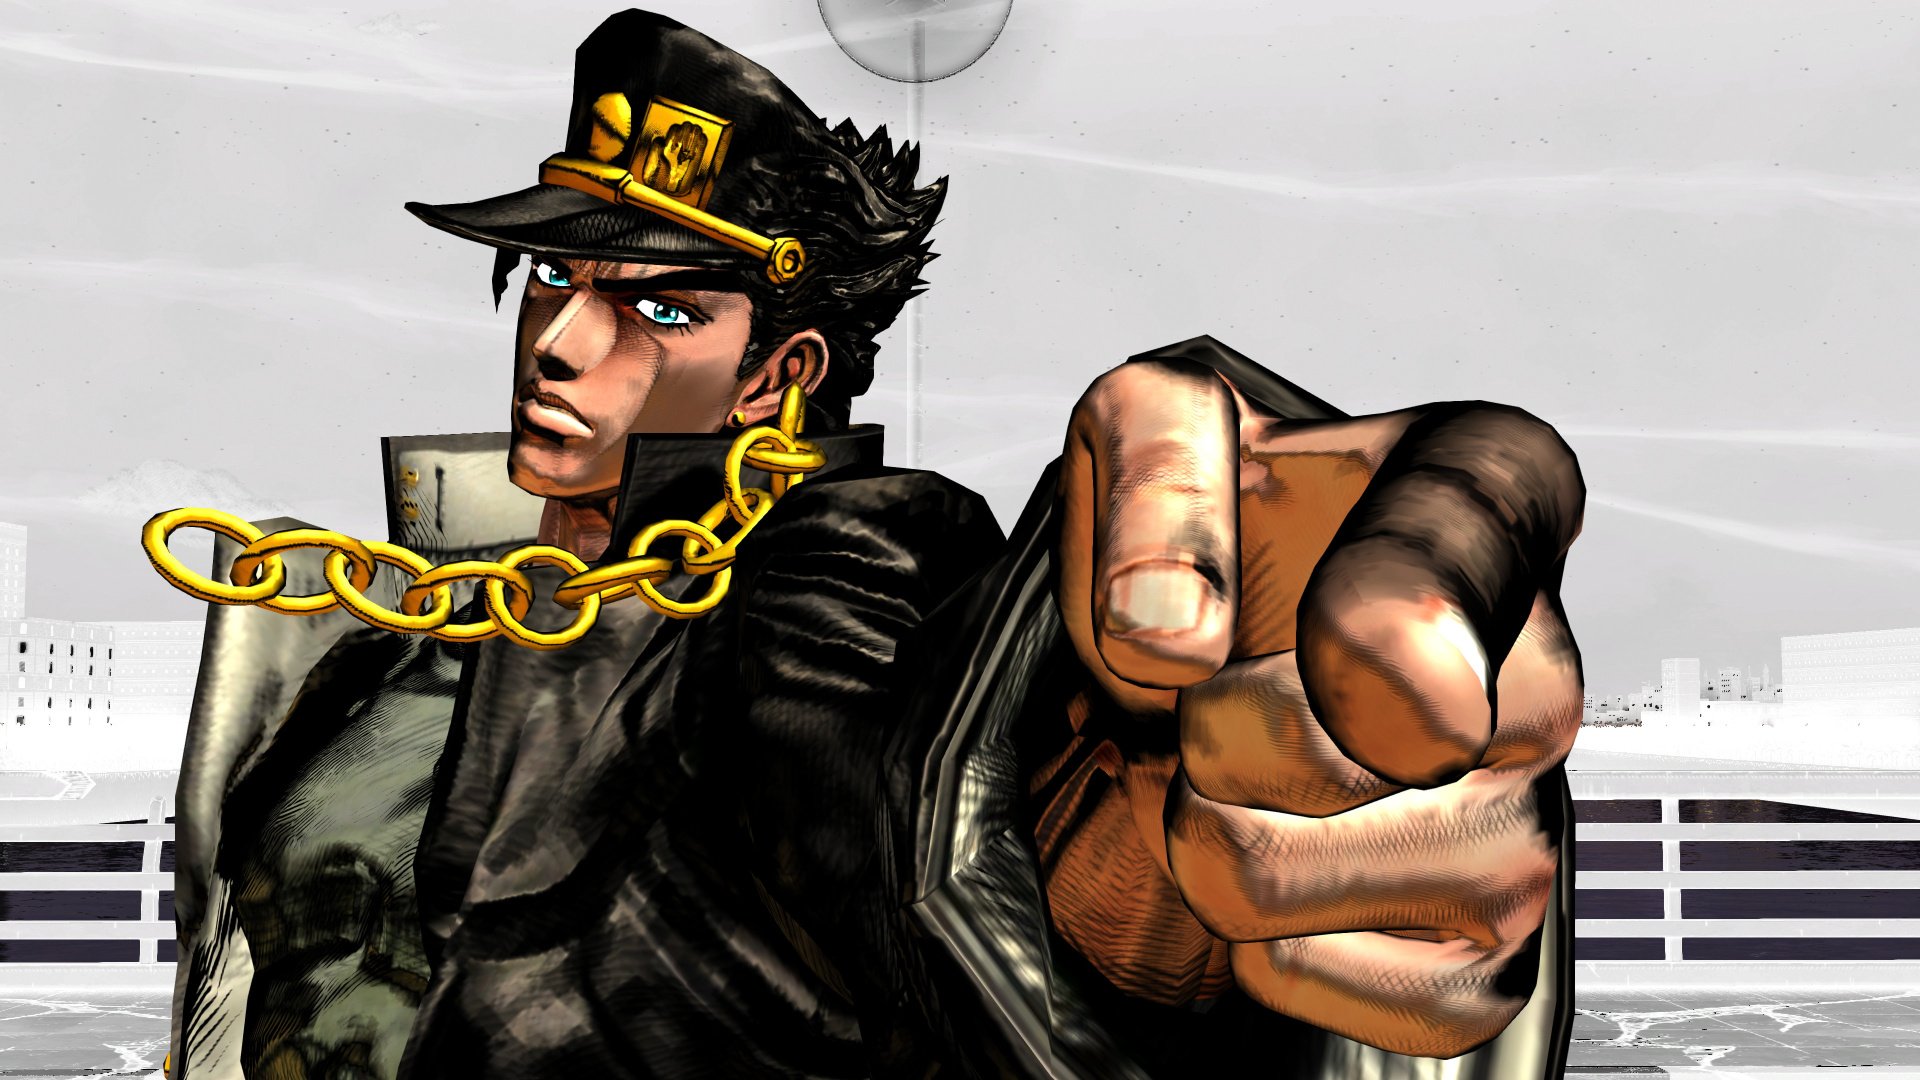 Know Your JoJo Poses: The Guessing Game